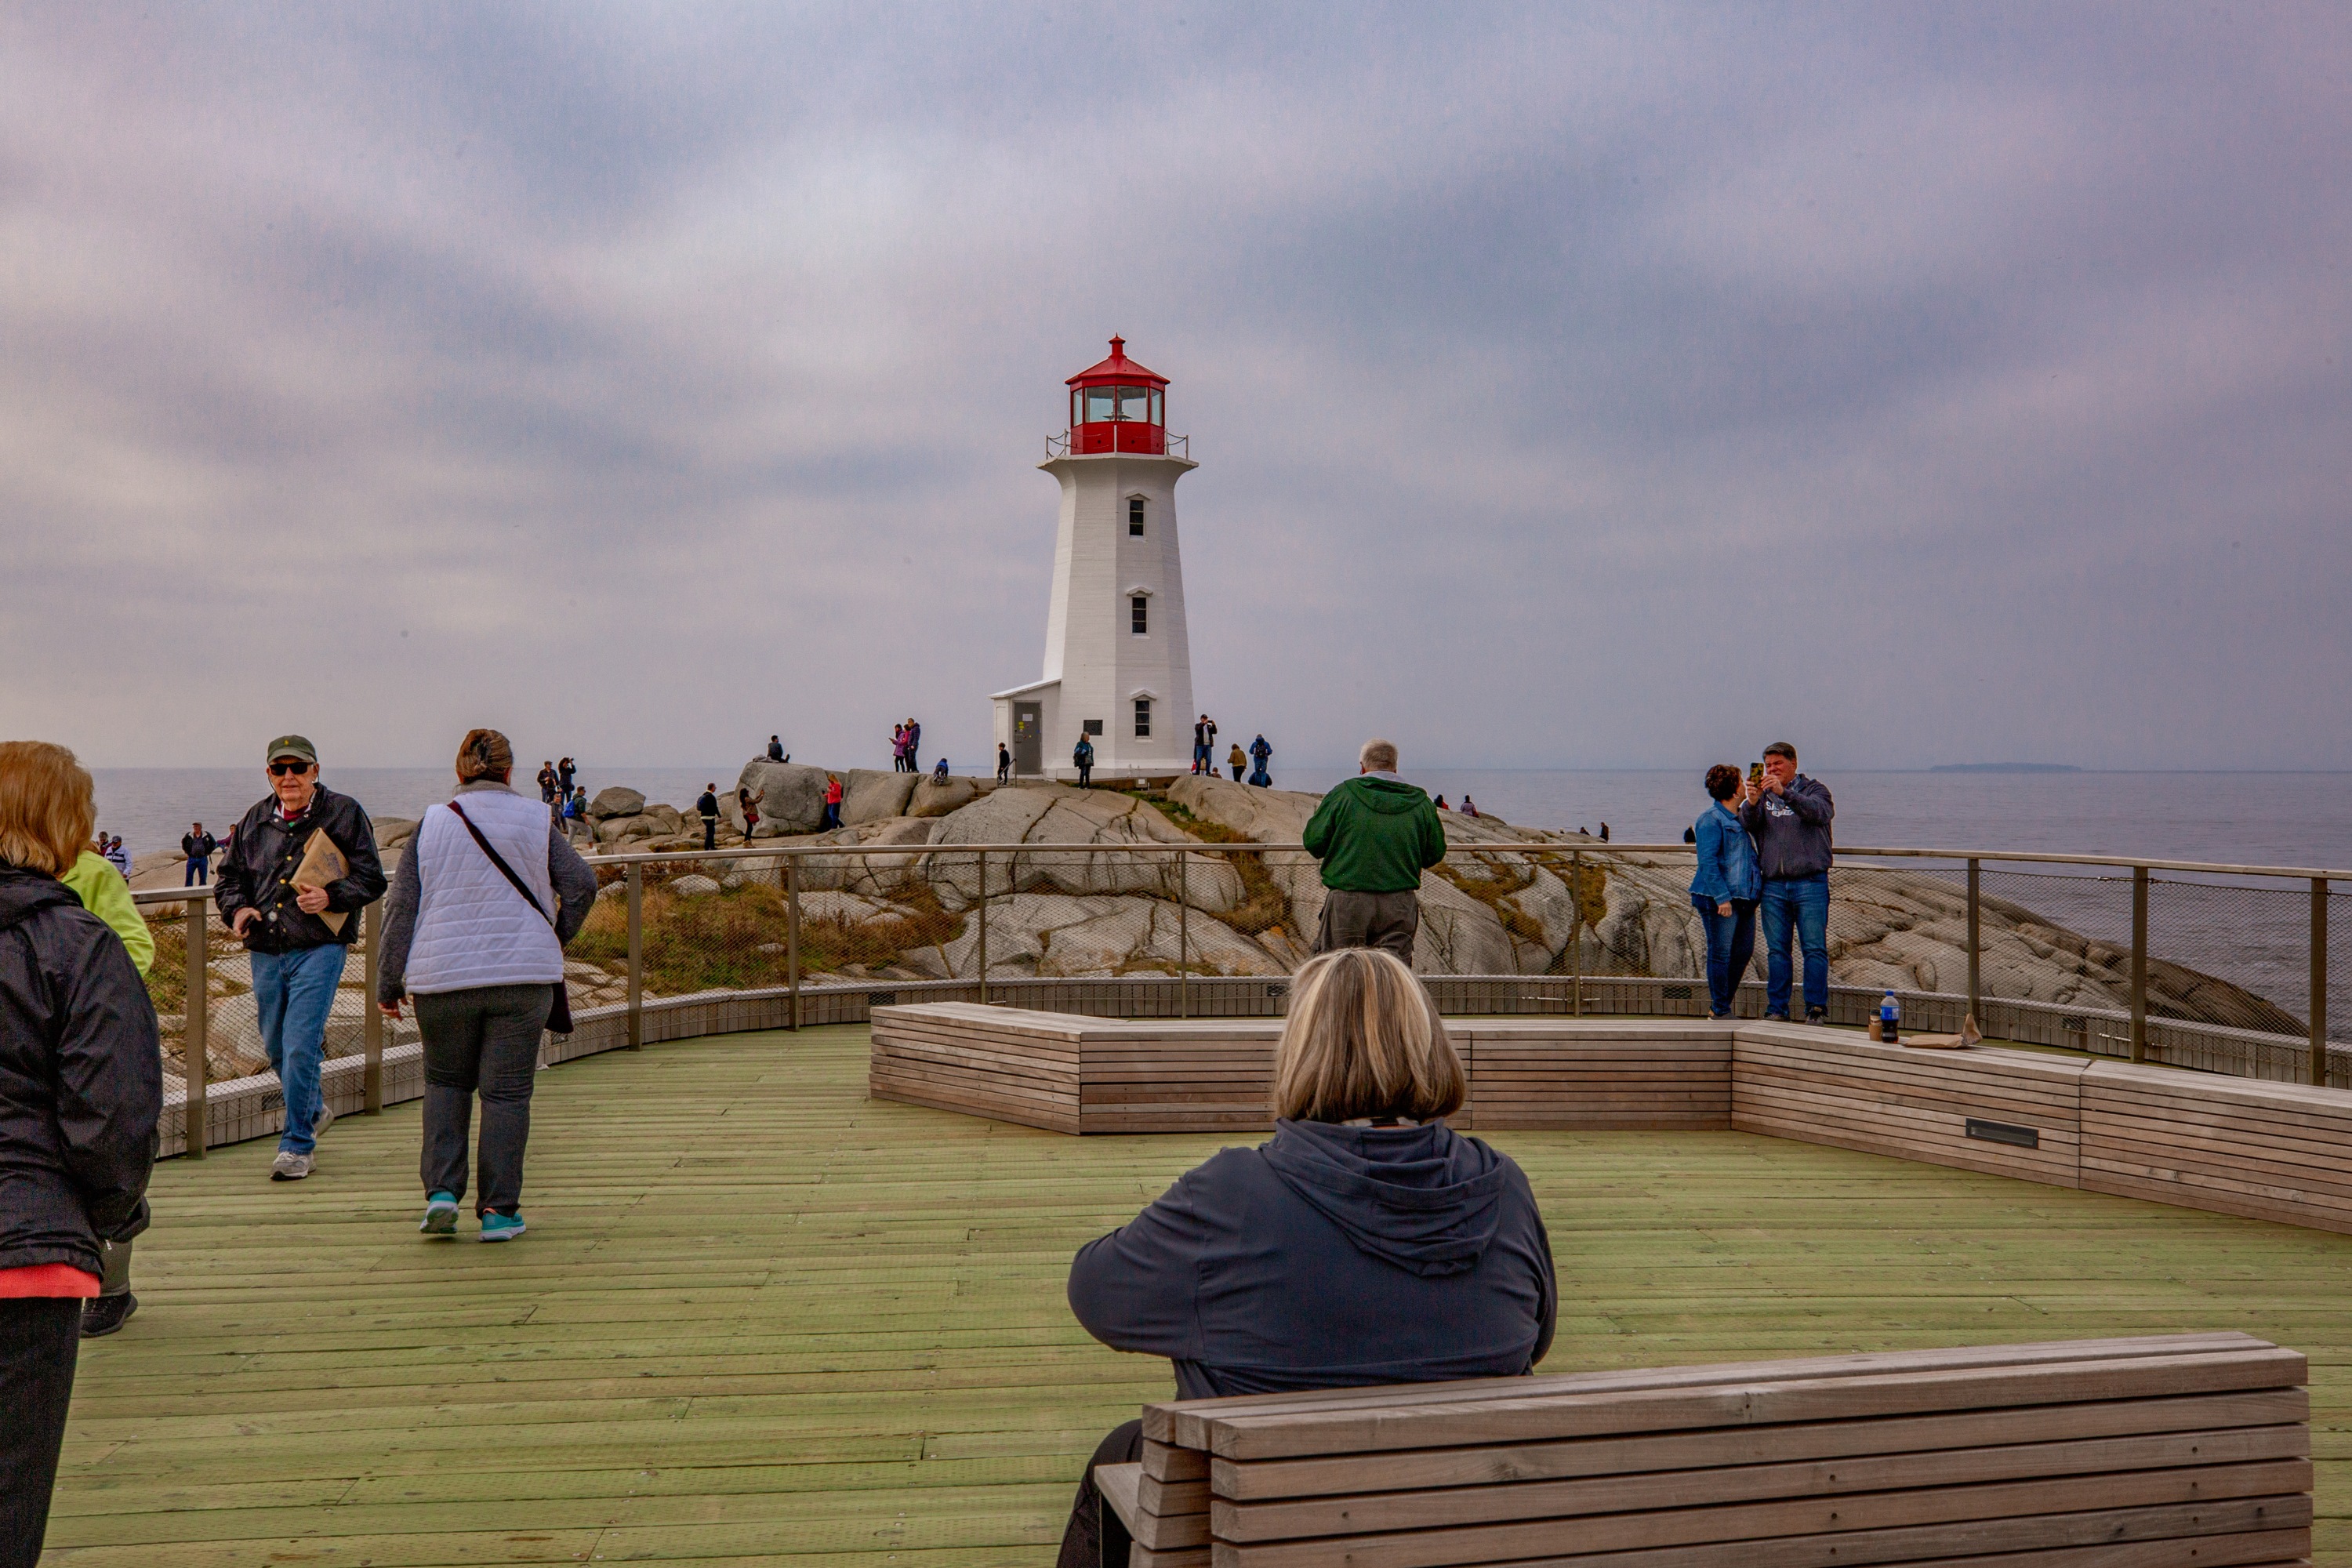 Folks take photos and selfies on the viewing deck at Peggy's Cove